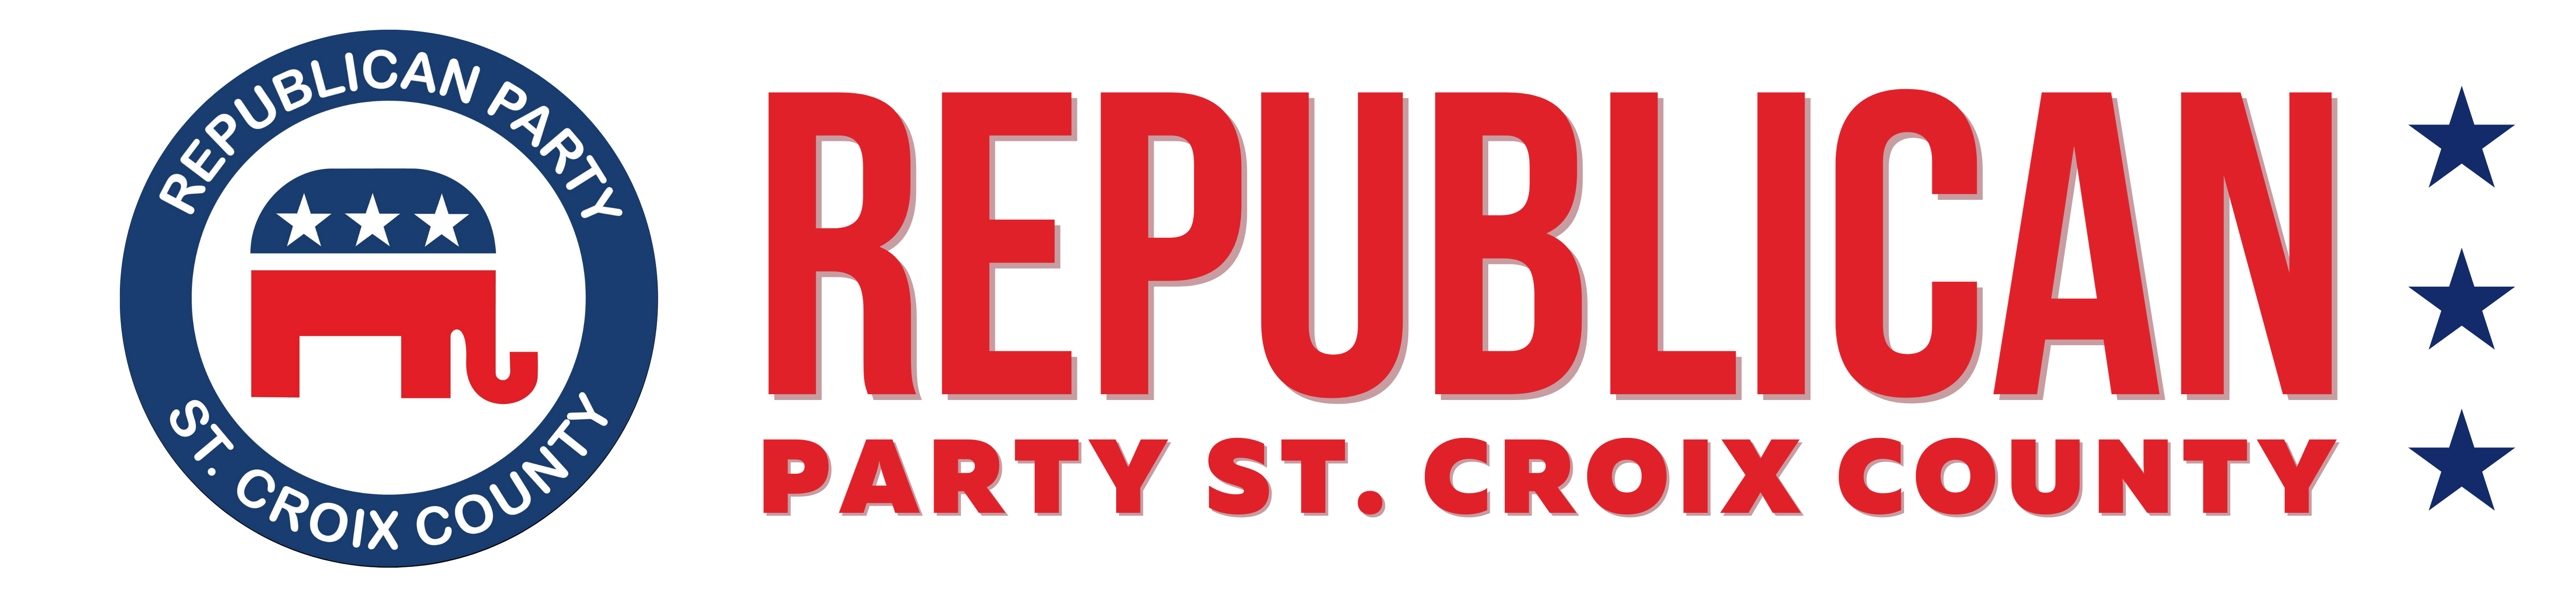 Republican Party of St. Croix County